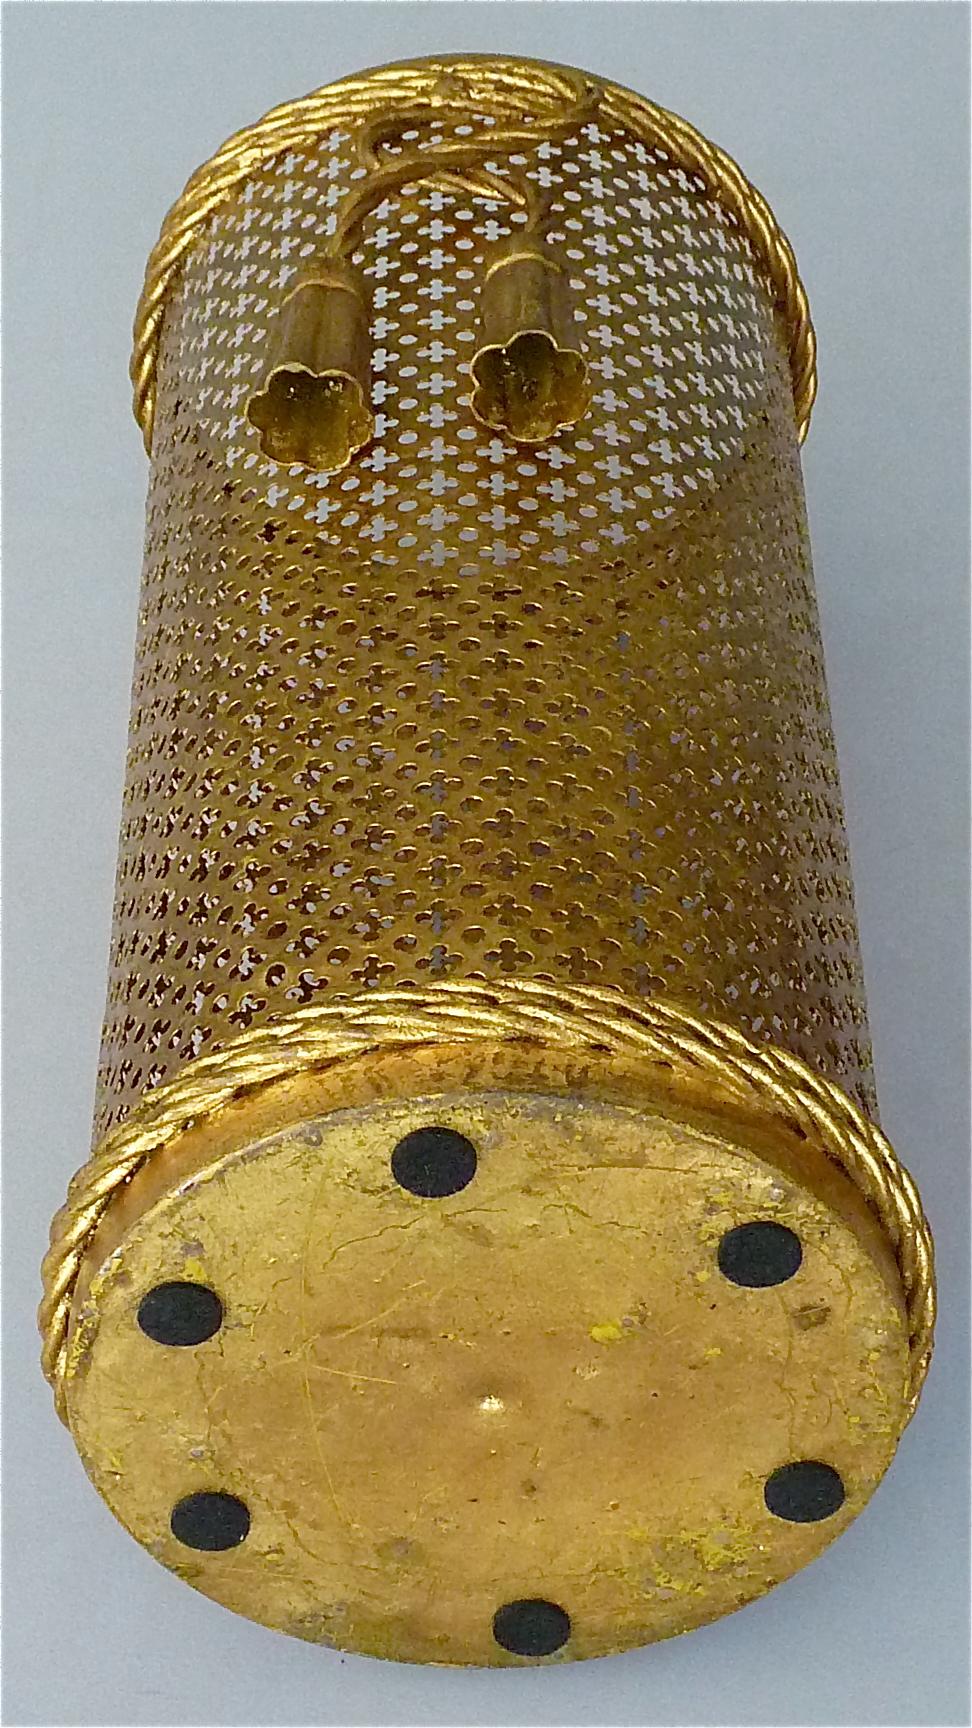 Italian Midcentury Umbrella Stand Gilt Perforated Metal, Hans Kögl Style, 1950s For Sale 6